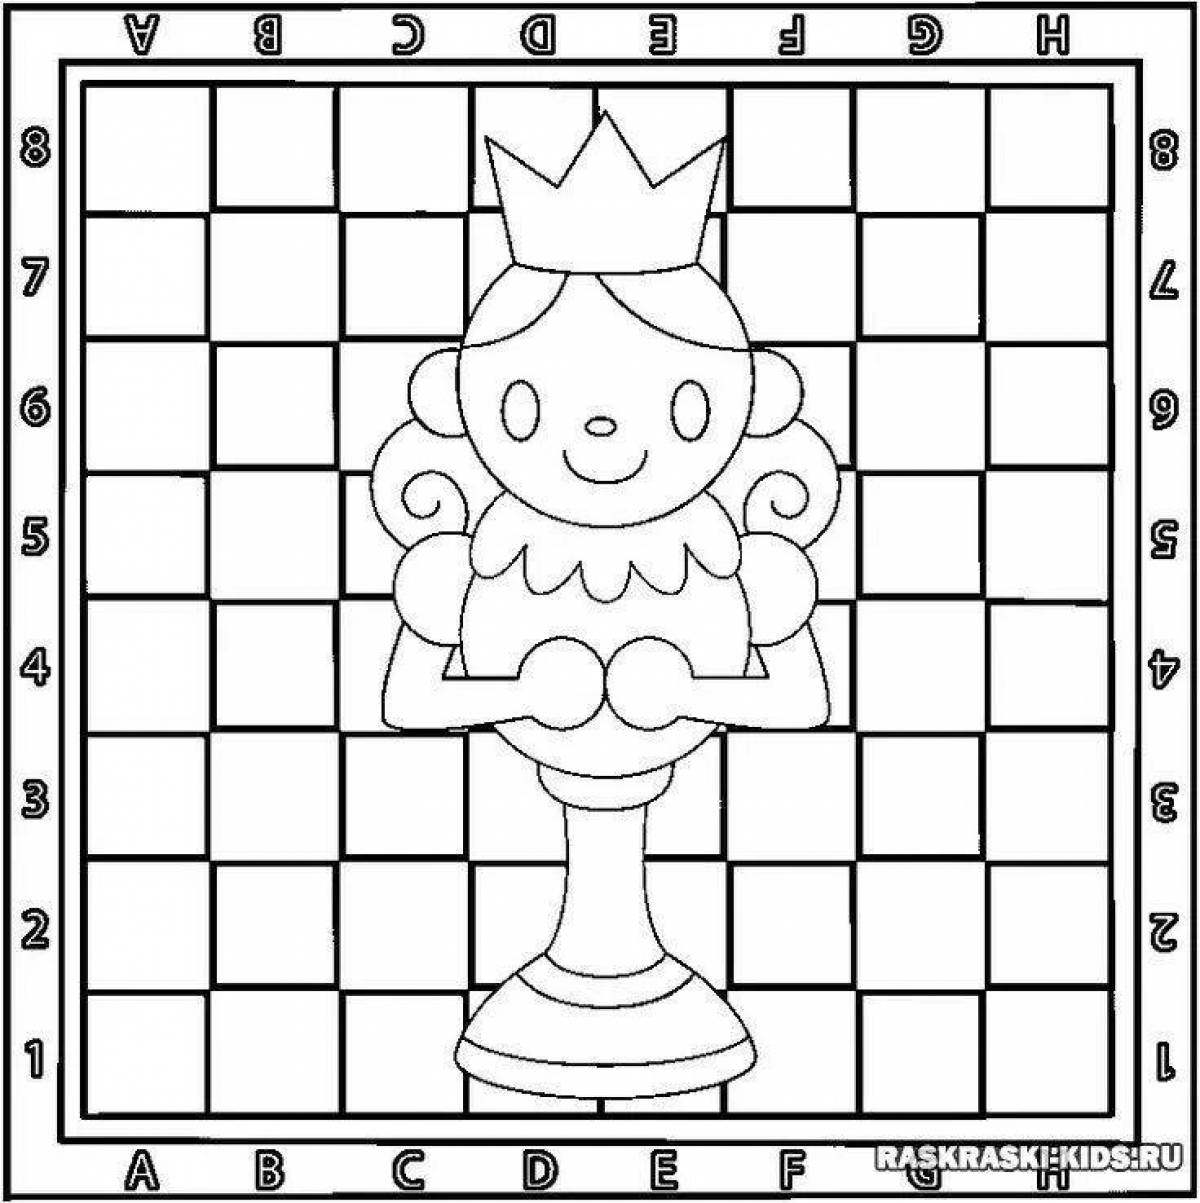 Colorful chess coloring book for kids to learn the rules